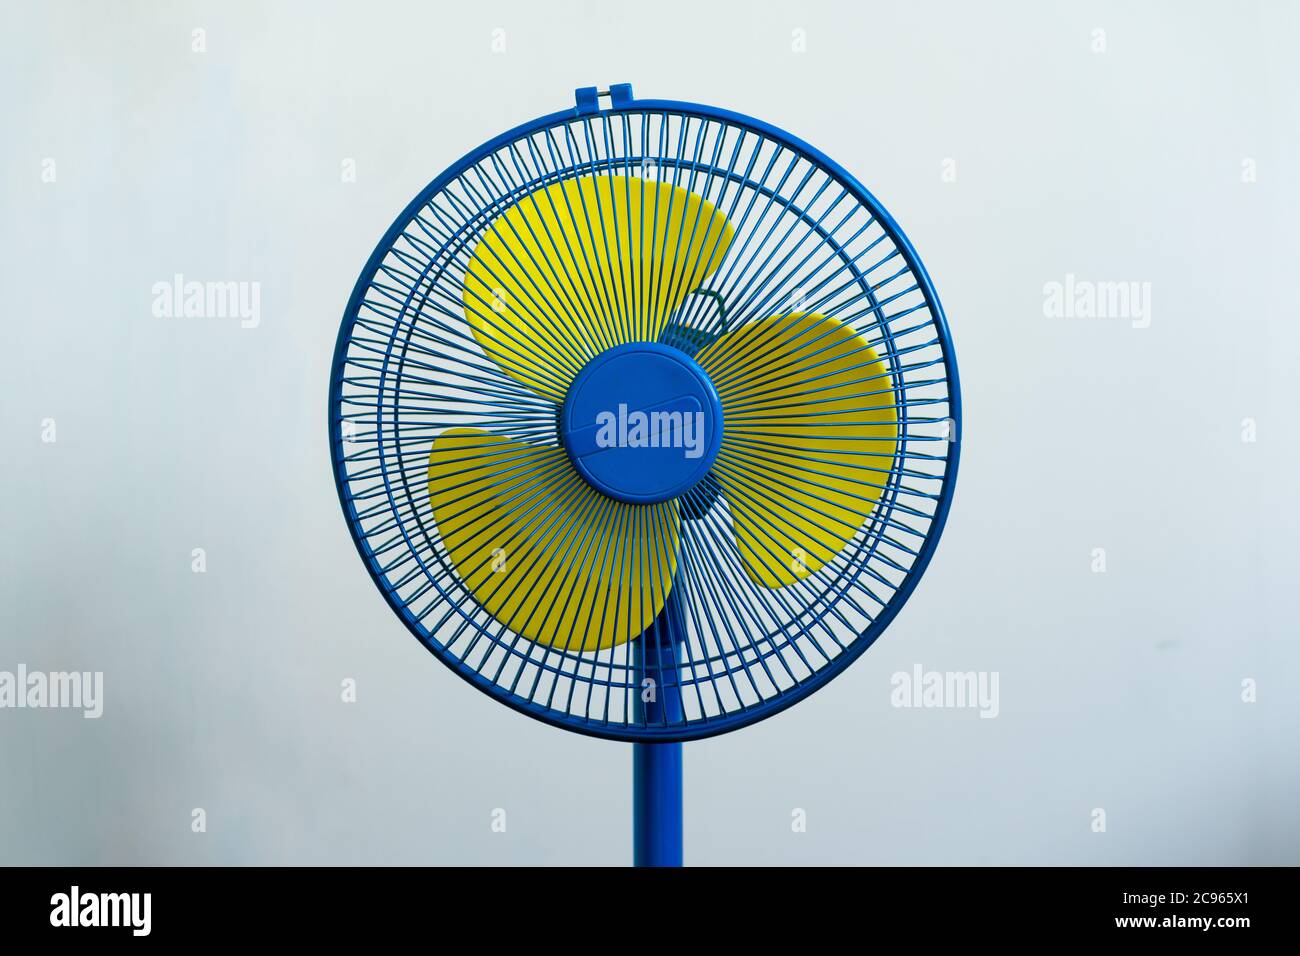 A colorful blue and yellow standing fan for cool air in a hot summer Stock Photo